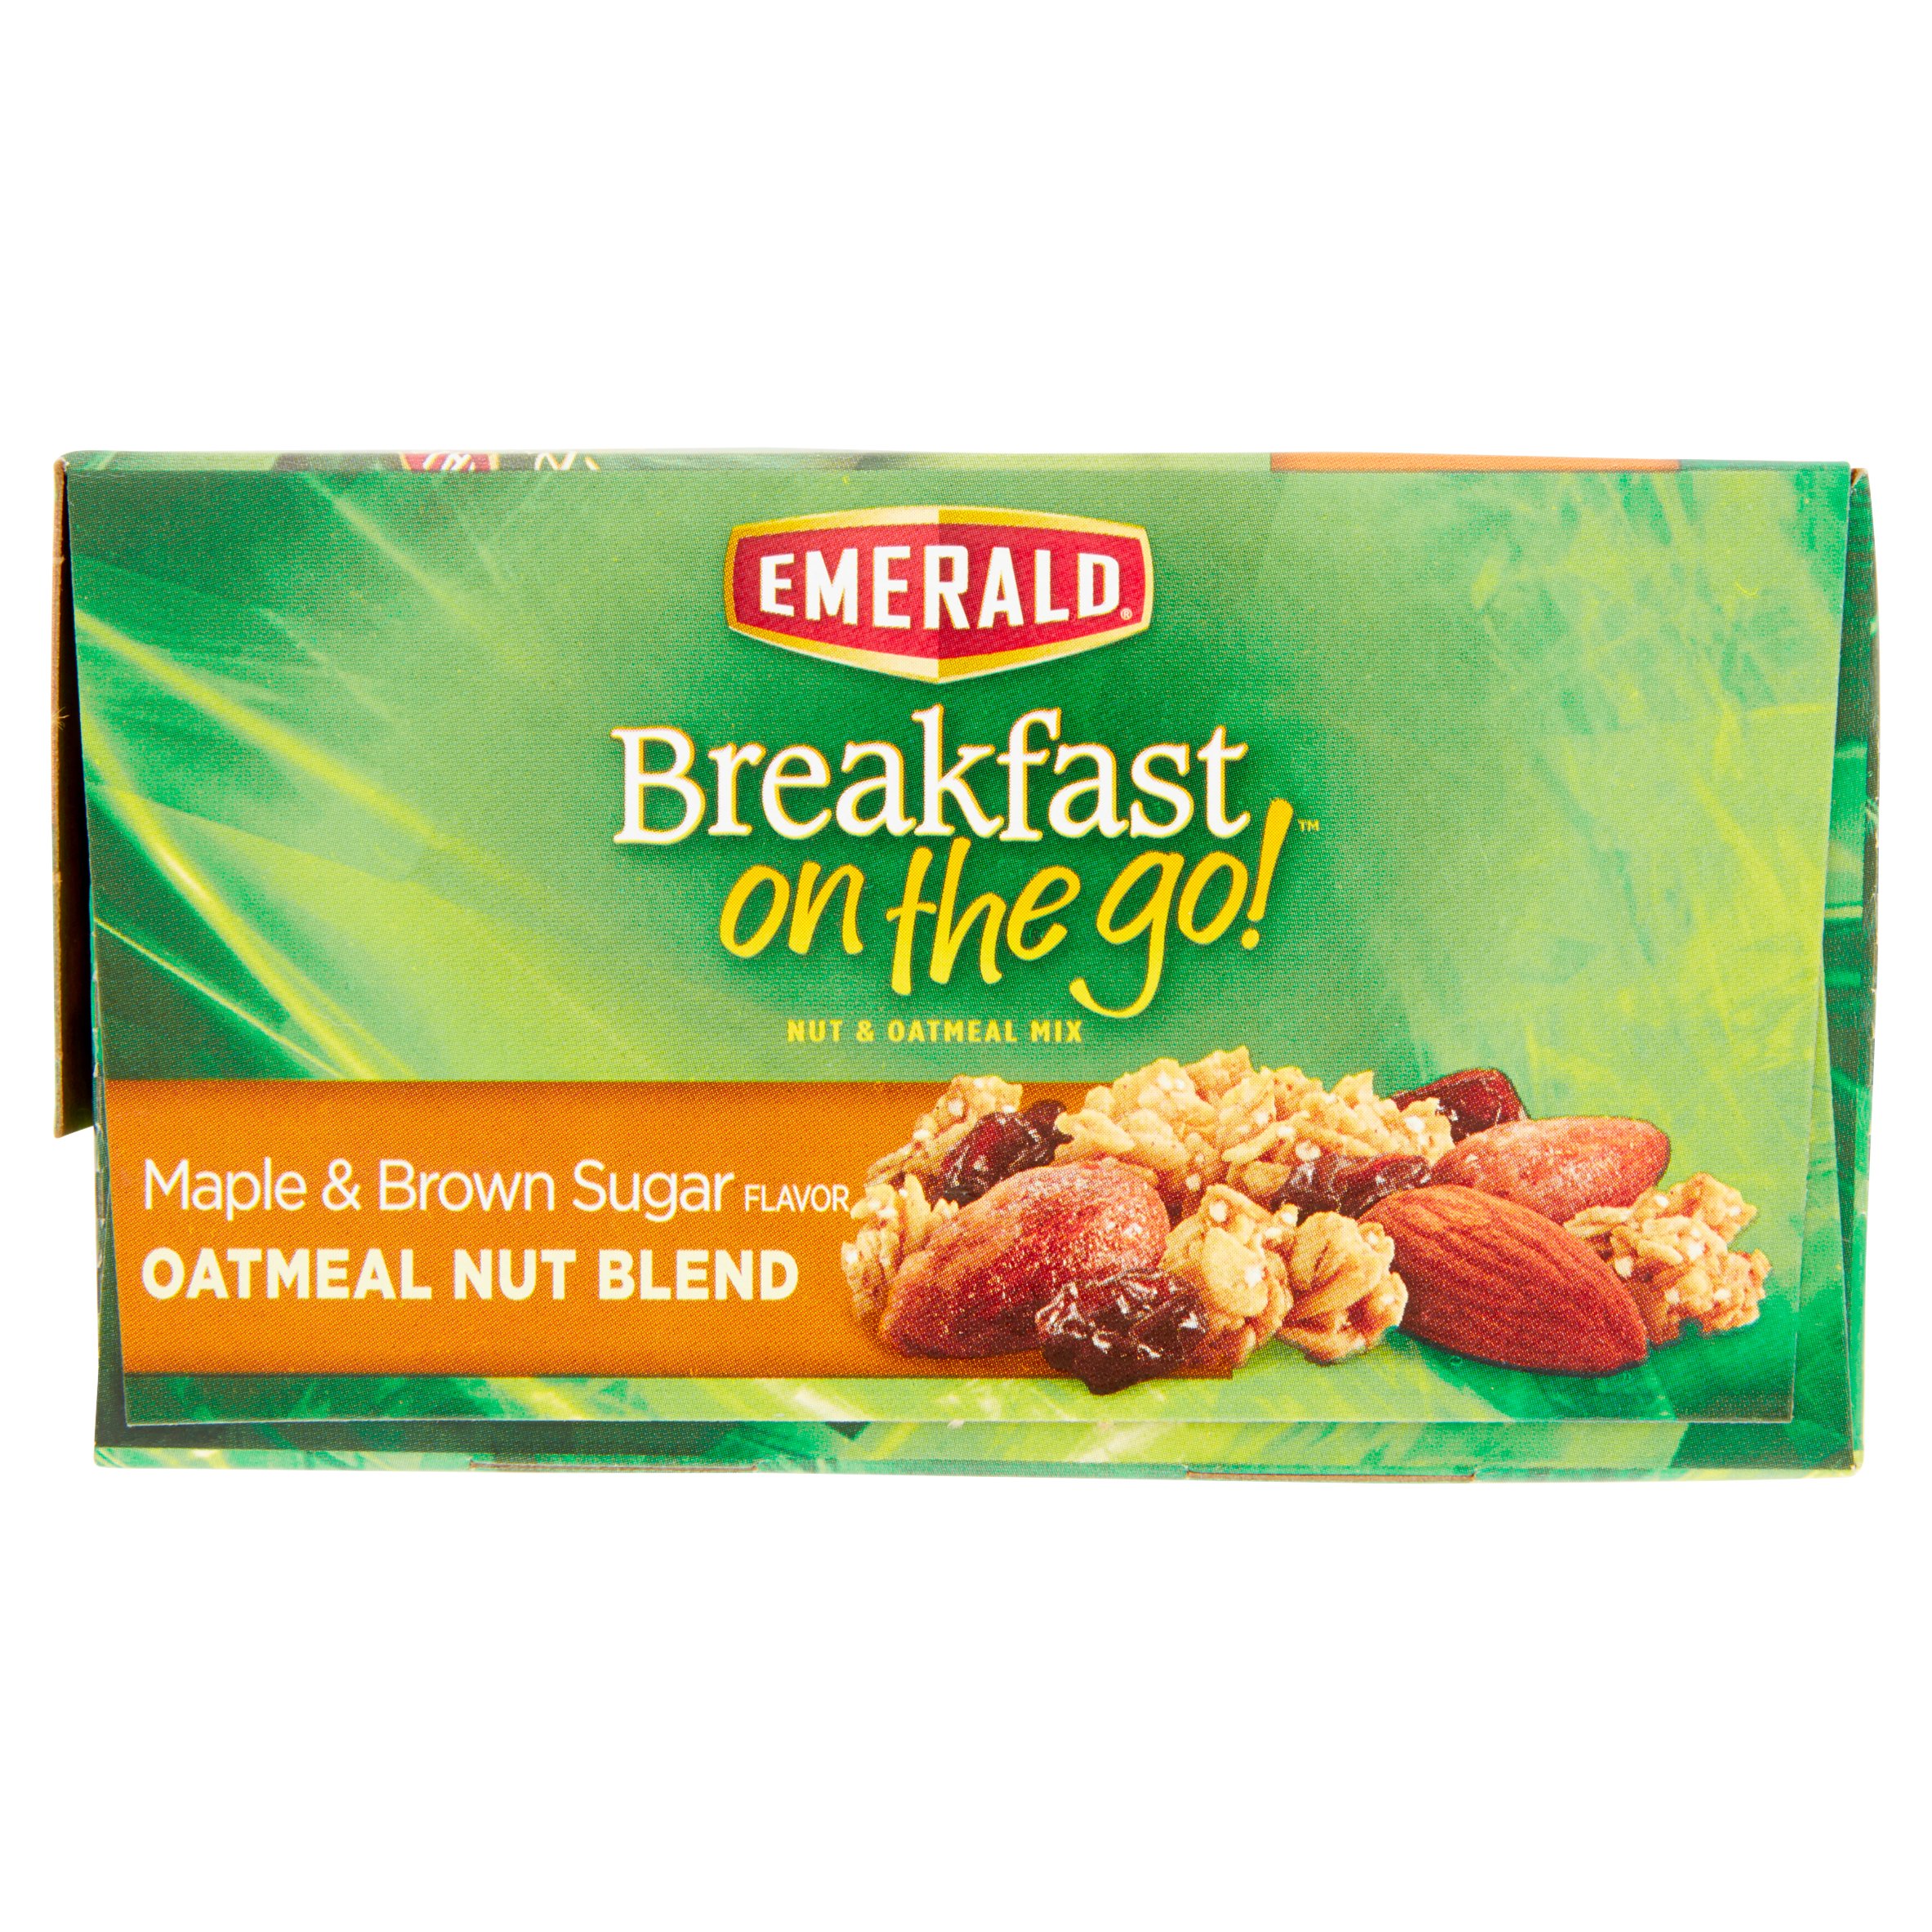 Emerald Breakfast On The Go Nut & Oatmeal Mix, Maple & Brown Sugar, 1.5 Oz, 5 Ct - image 3 of 5